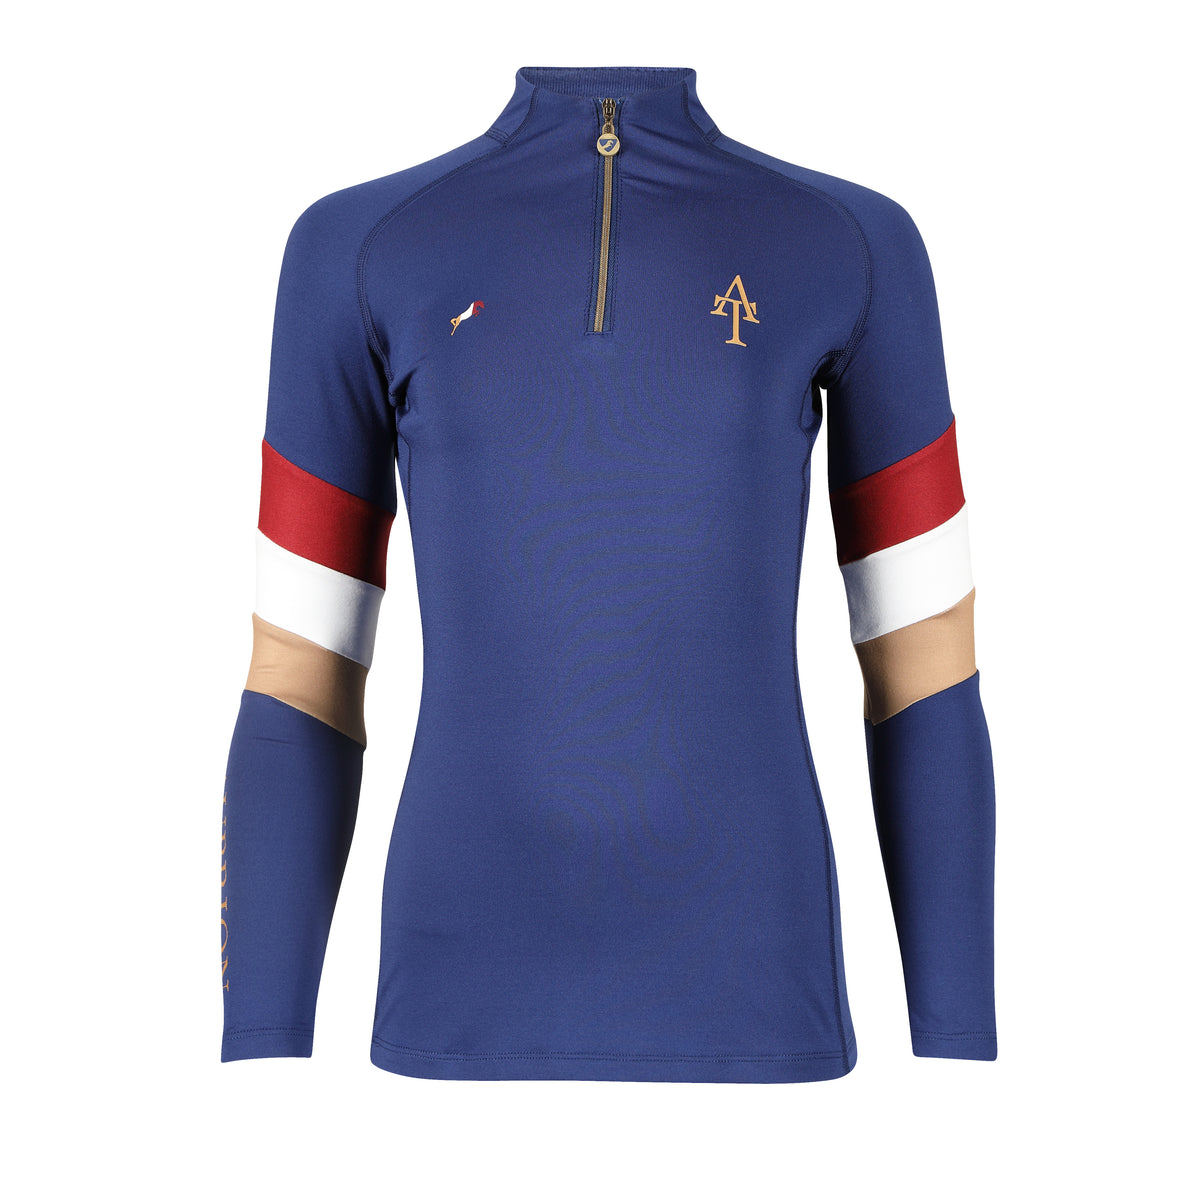 Shires Young Rider Aubrion Team Long Sleeve Base Layer